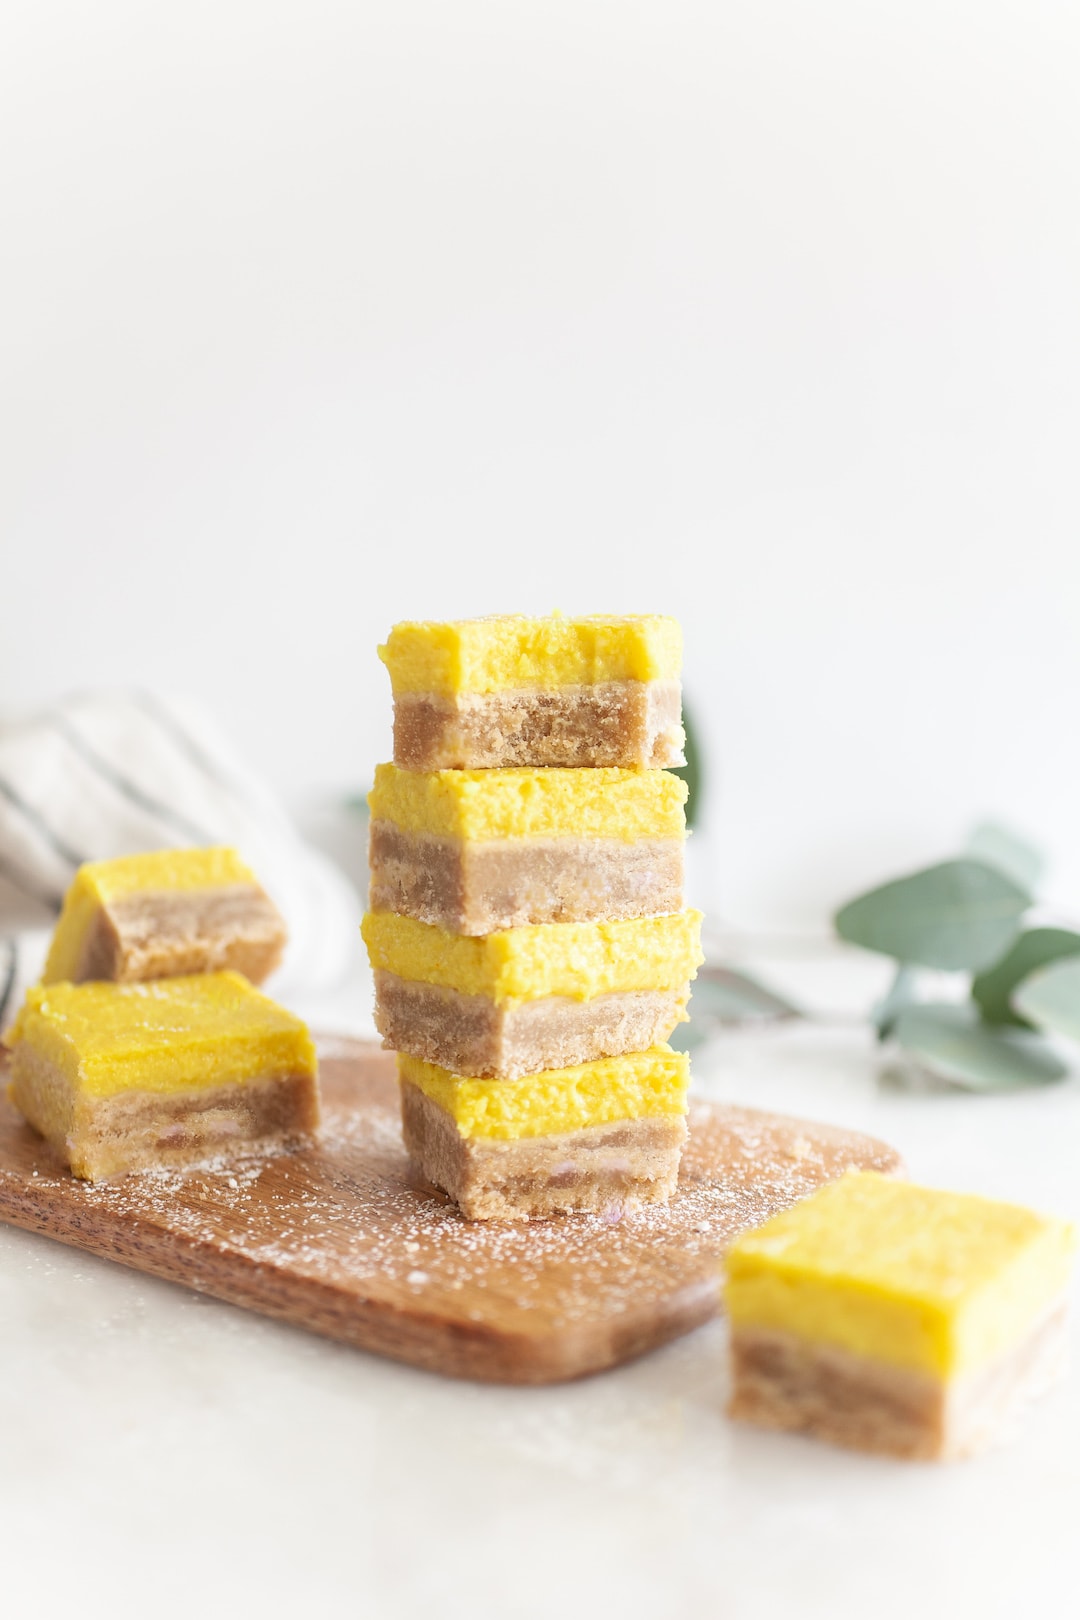 stack of 4 Best Vegan Lemon Bars with bite taken out of the top one